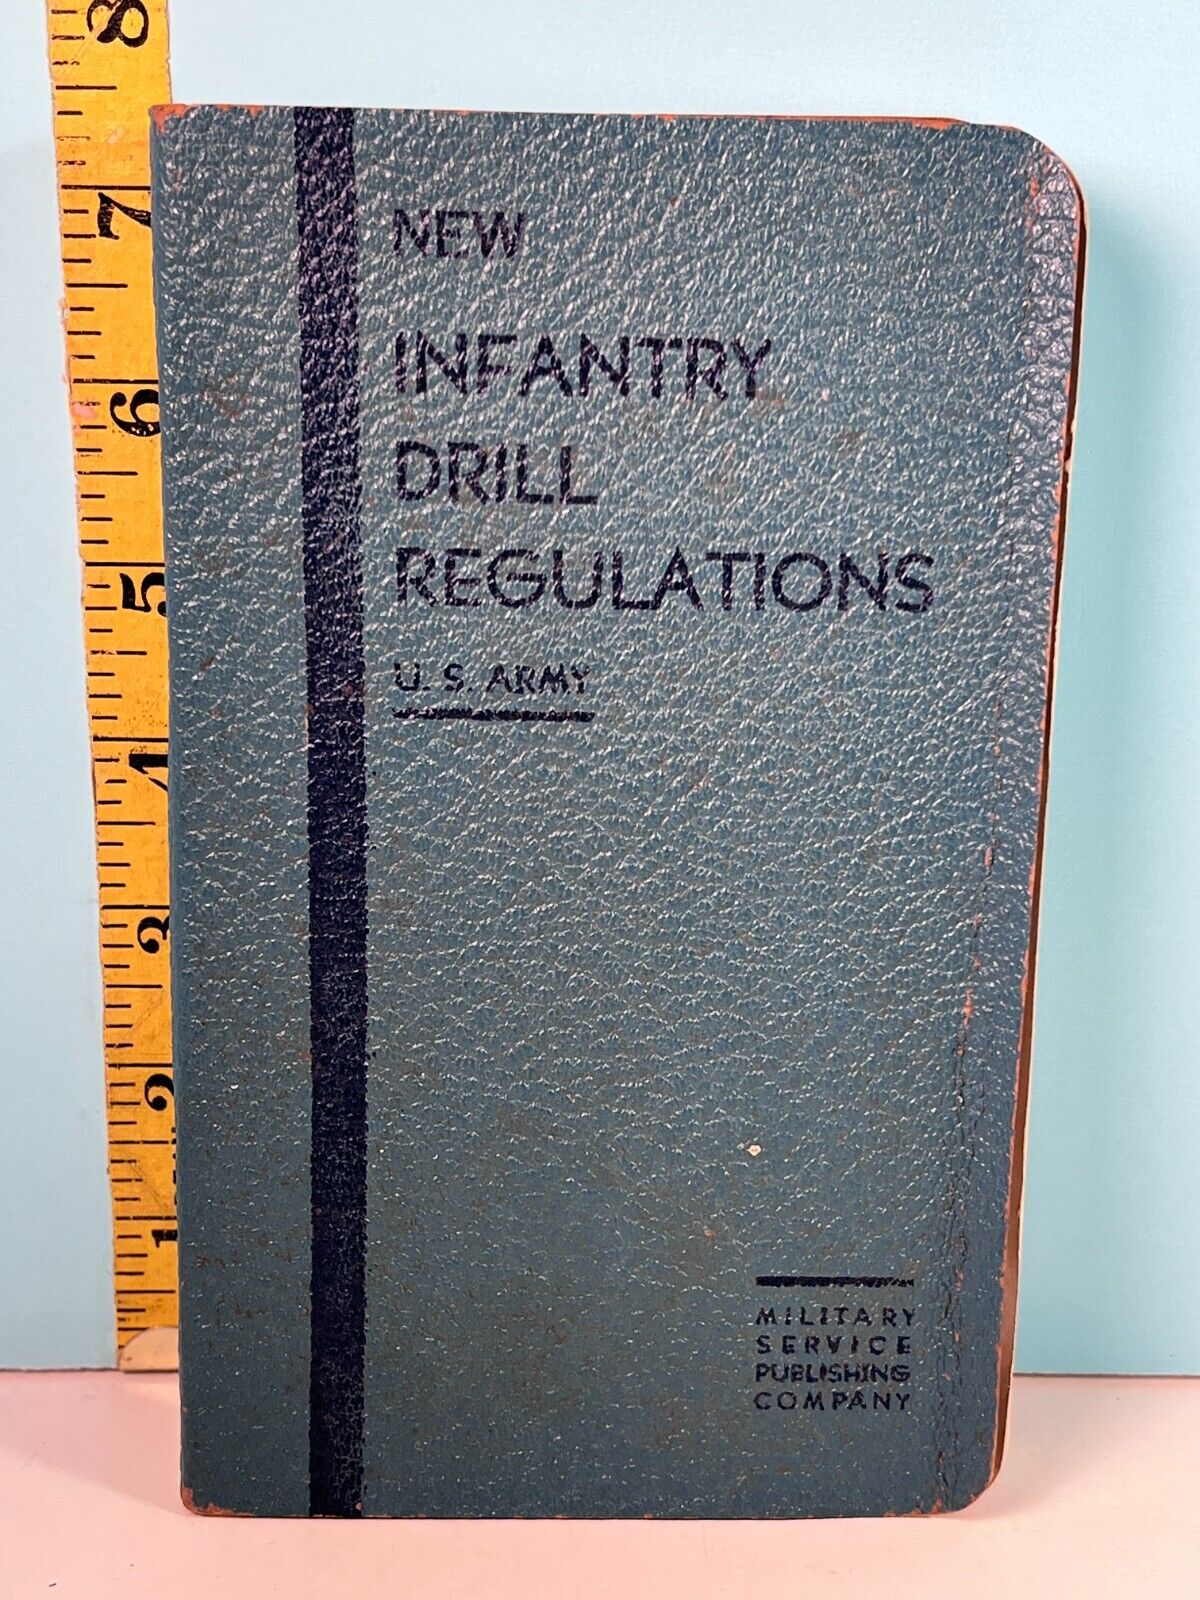 🔥1903 New Infantry Drill Regulations US Army Illustrated Booklet🔥